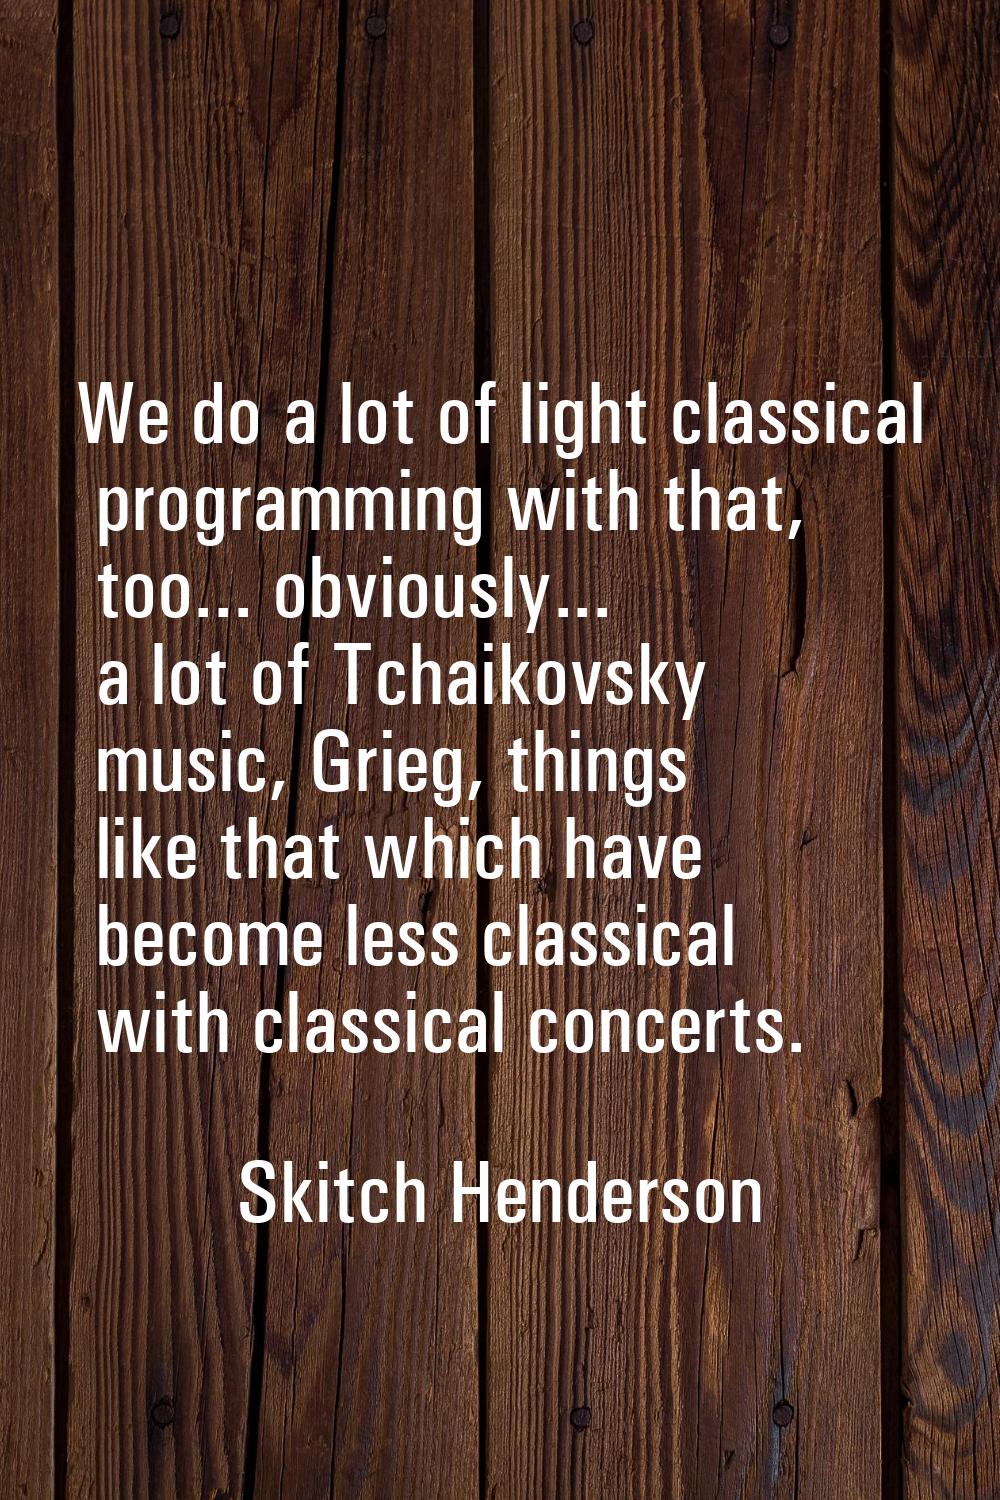 We do a lot of light classical programming with that, too... obviously... a lot of Tchaikovsky musi